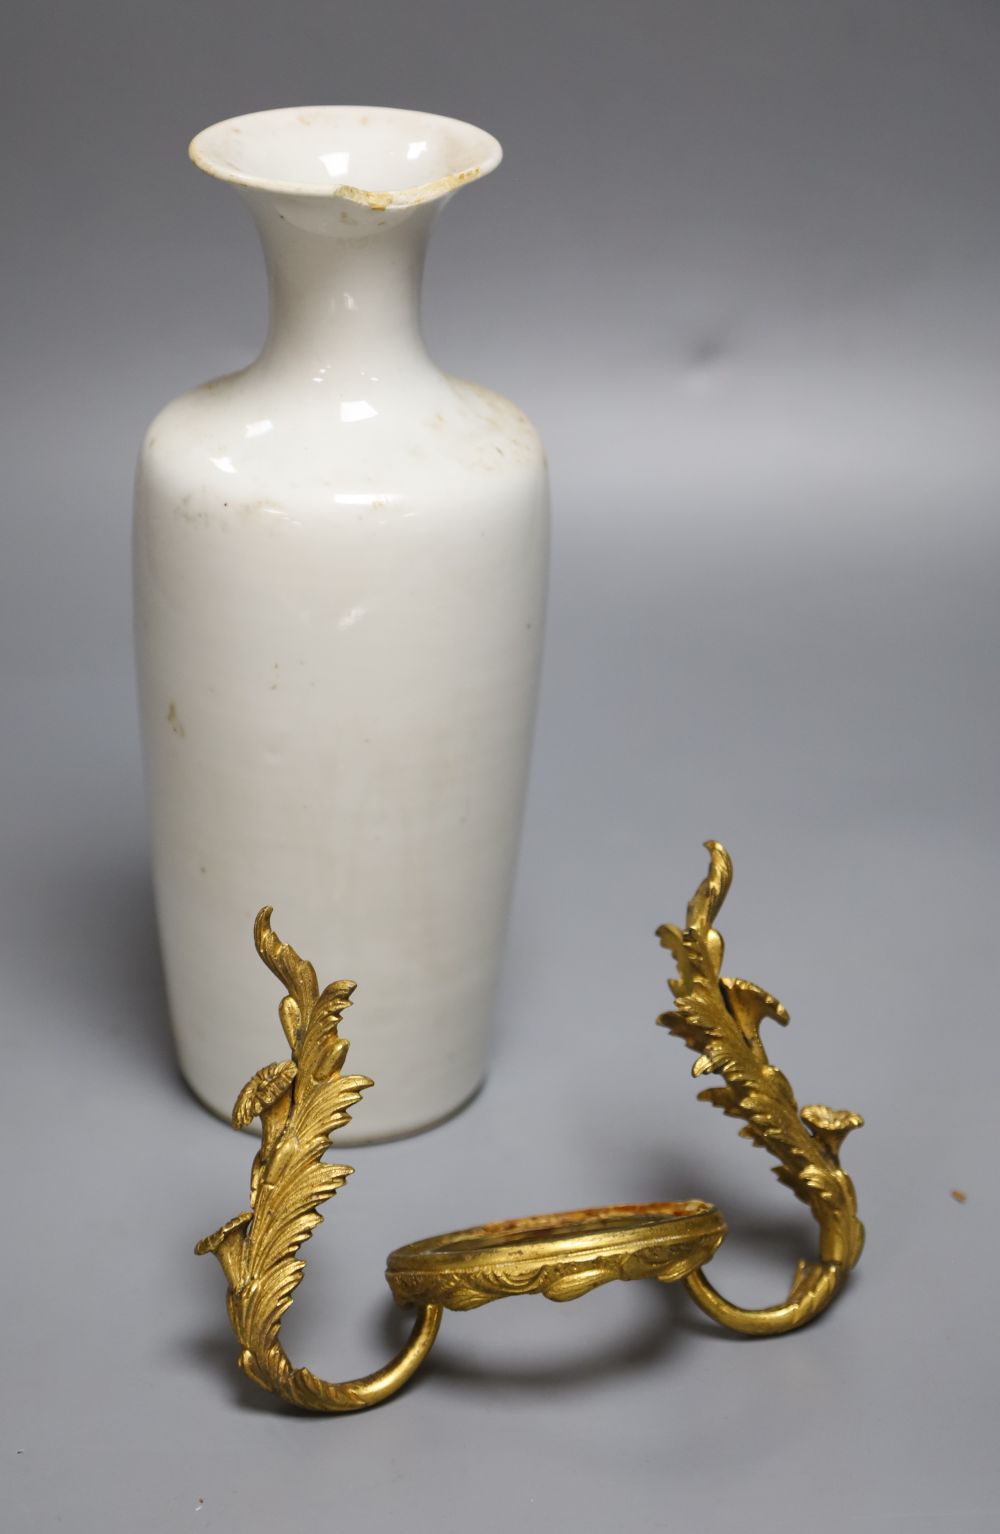 A 19th century Chinese blanc de chine mounted vase, height 24cm (a.f.), on ormolu rococo mount